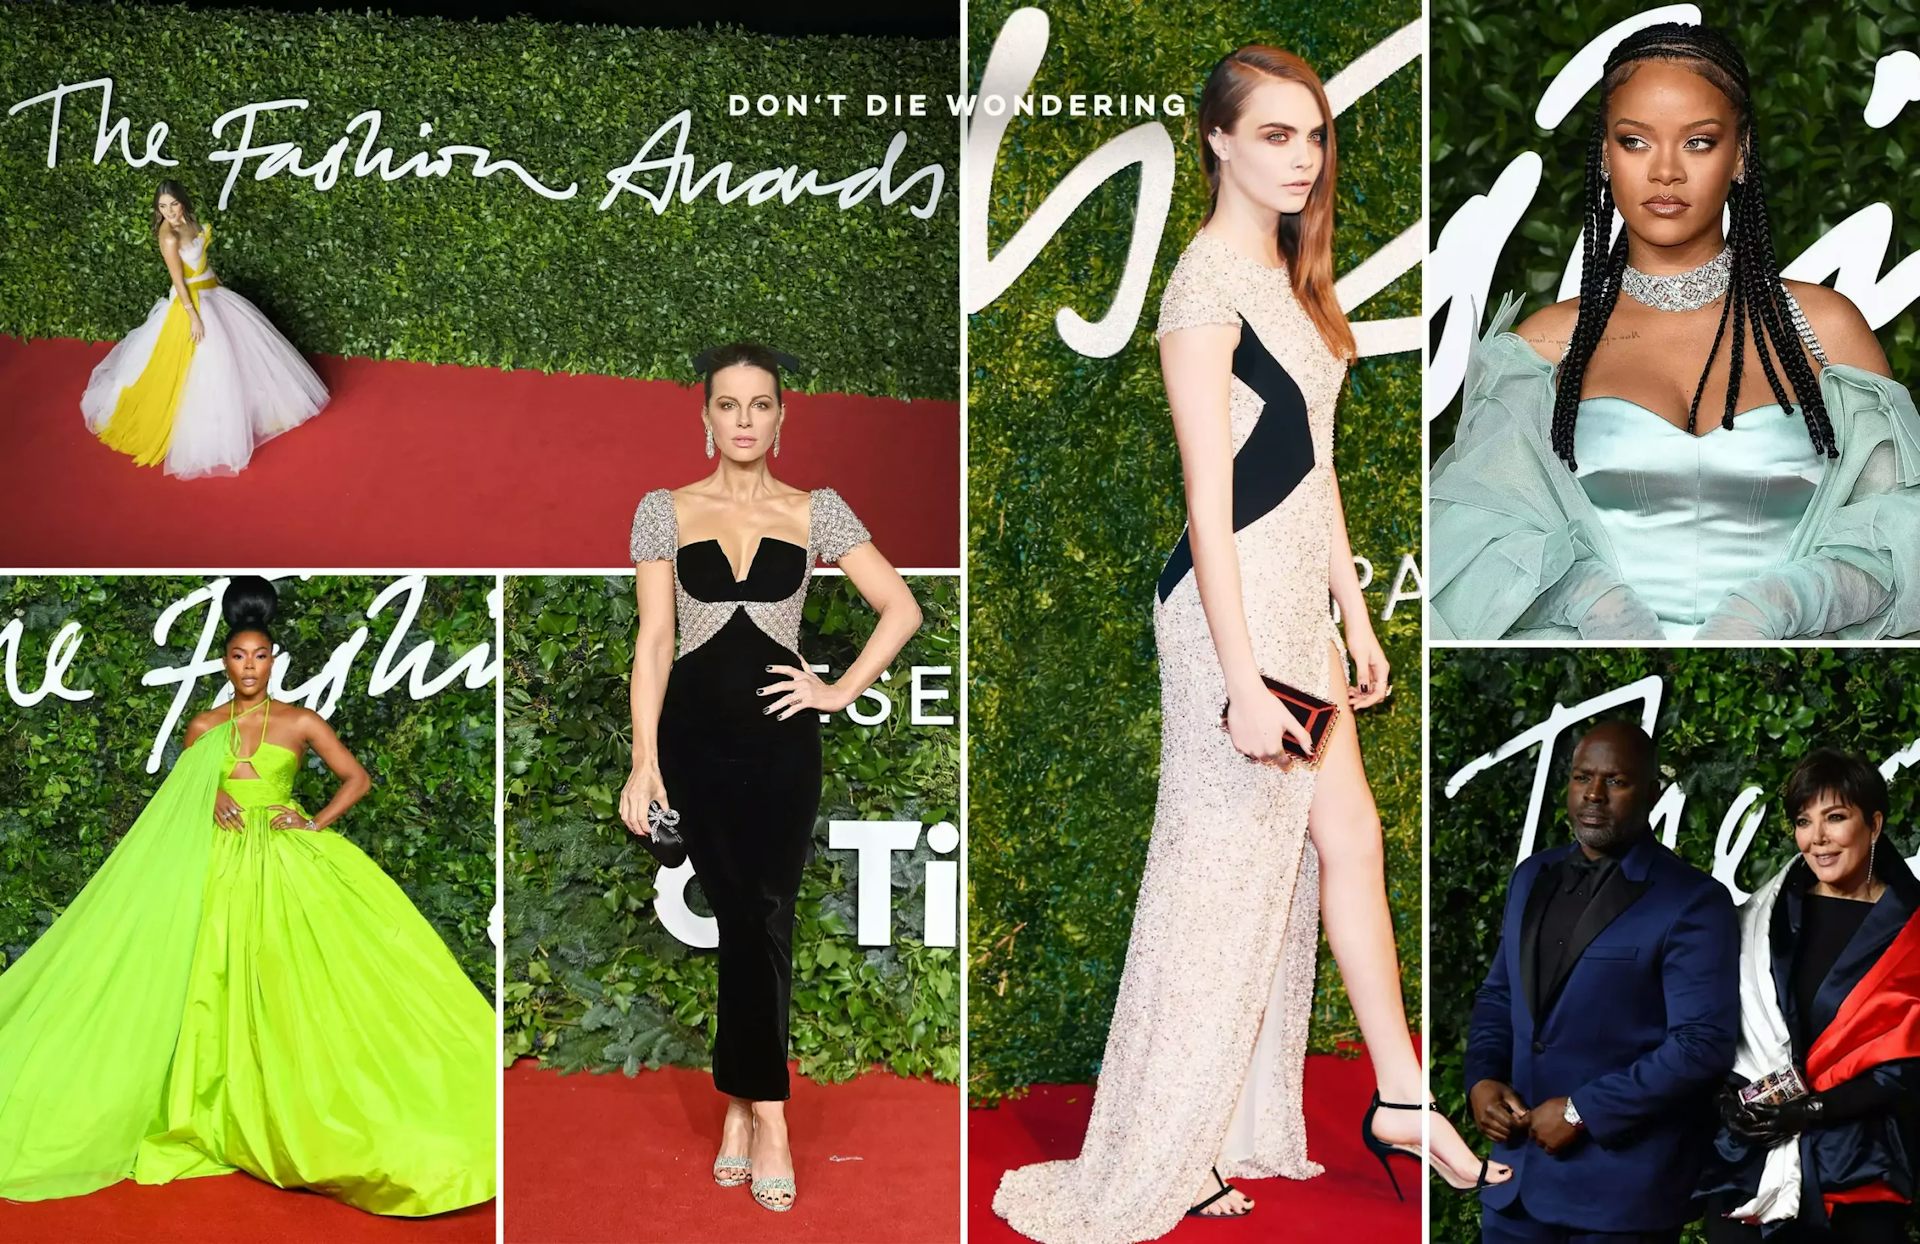 THE FASHION AWARDS 2021  CROWN THIS YEAR’S WINNERS